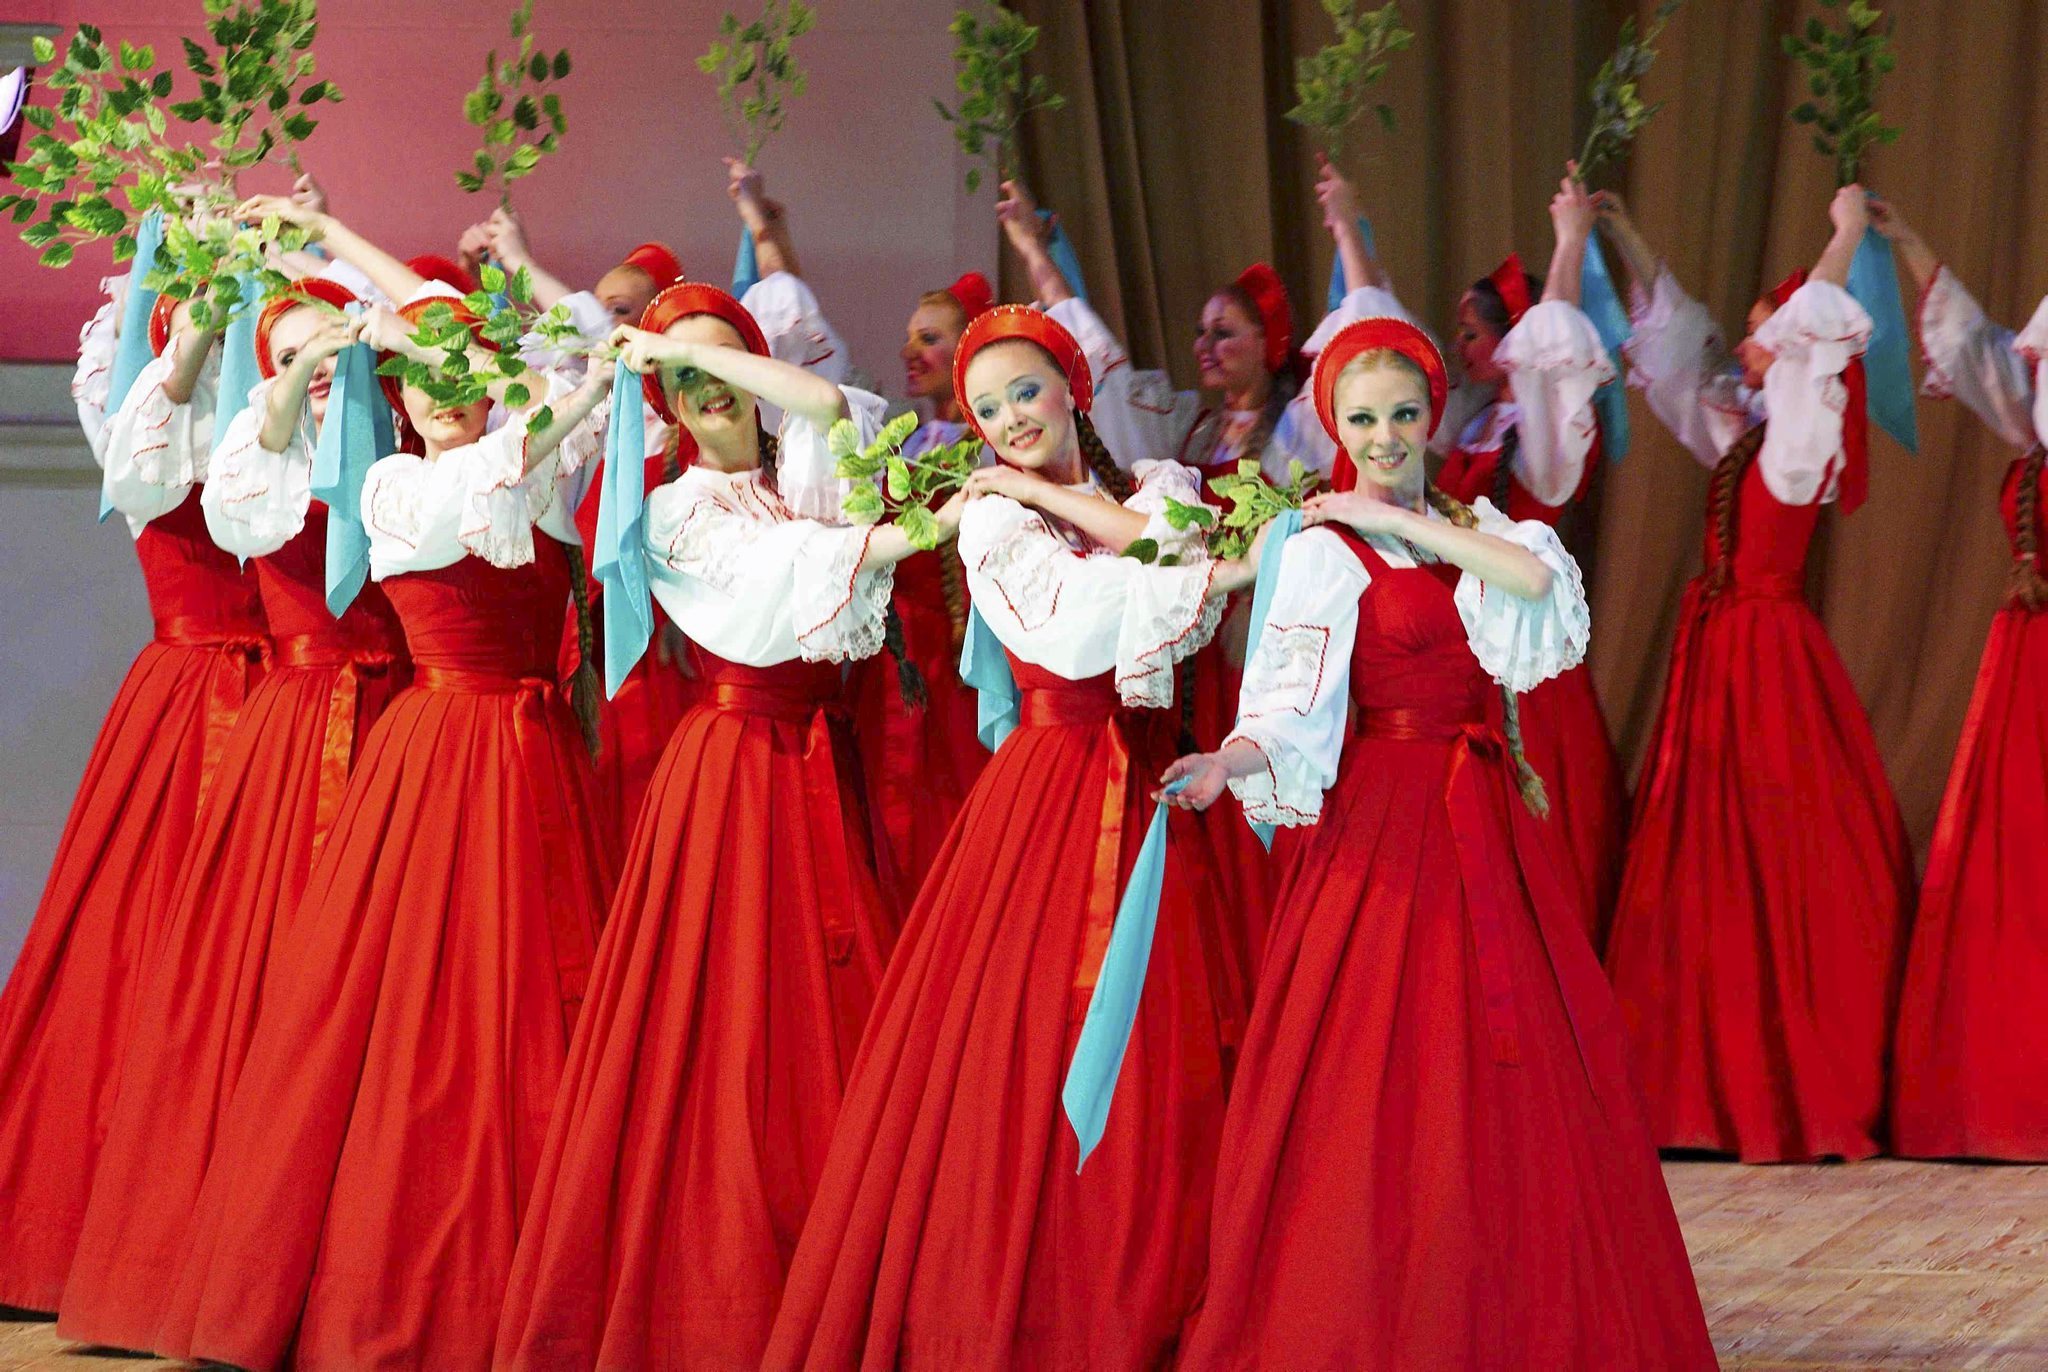 Maslenitsa Russian Festival Things to do in London